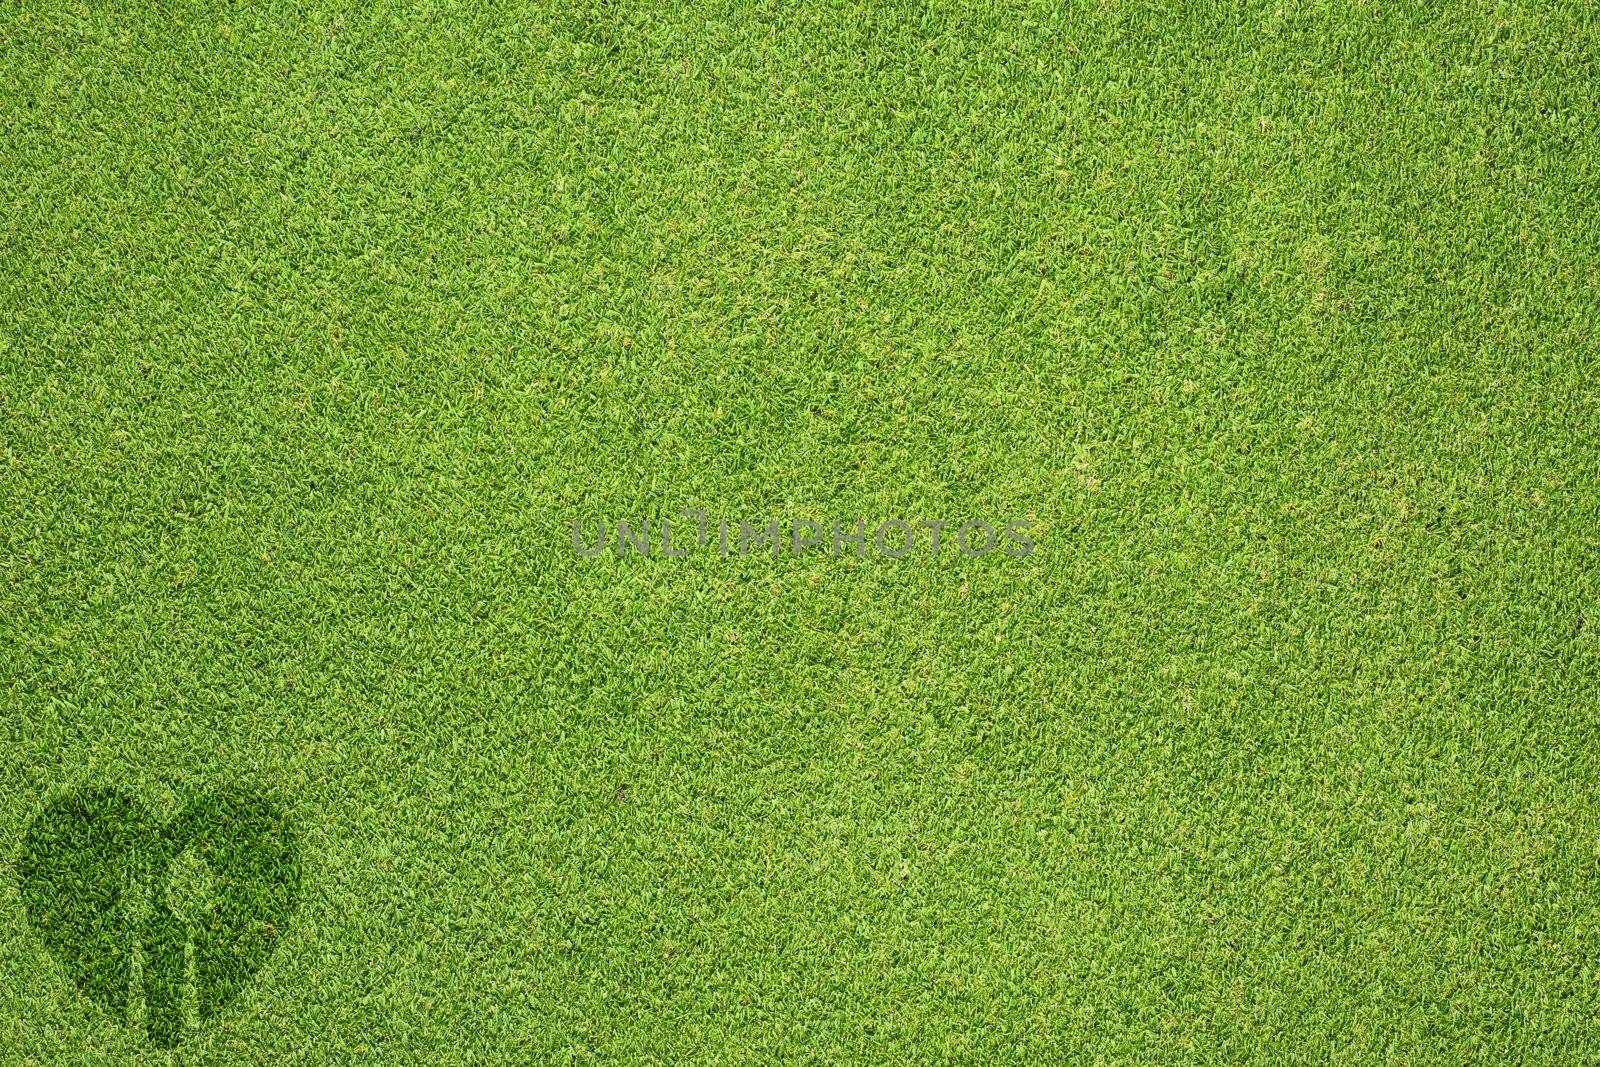 Spoon with heart icon on green grass texture and background